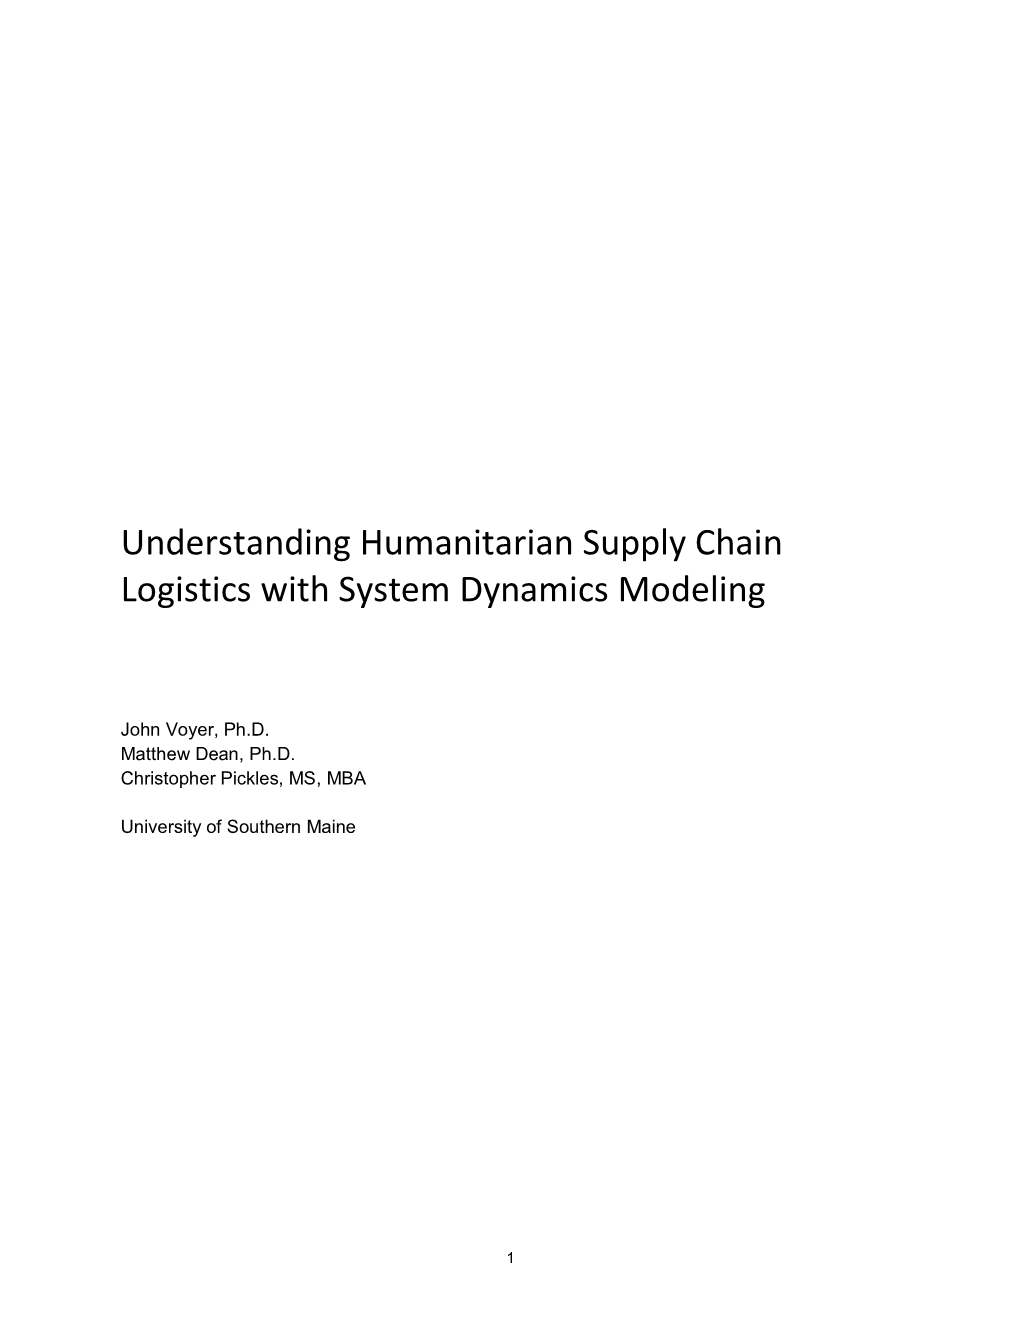 Understanding Humanitarian Supply Chain Logistics with System Dynamics Modeling